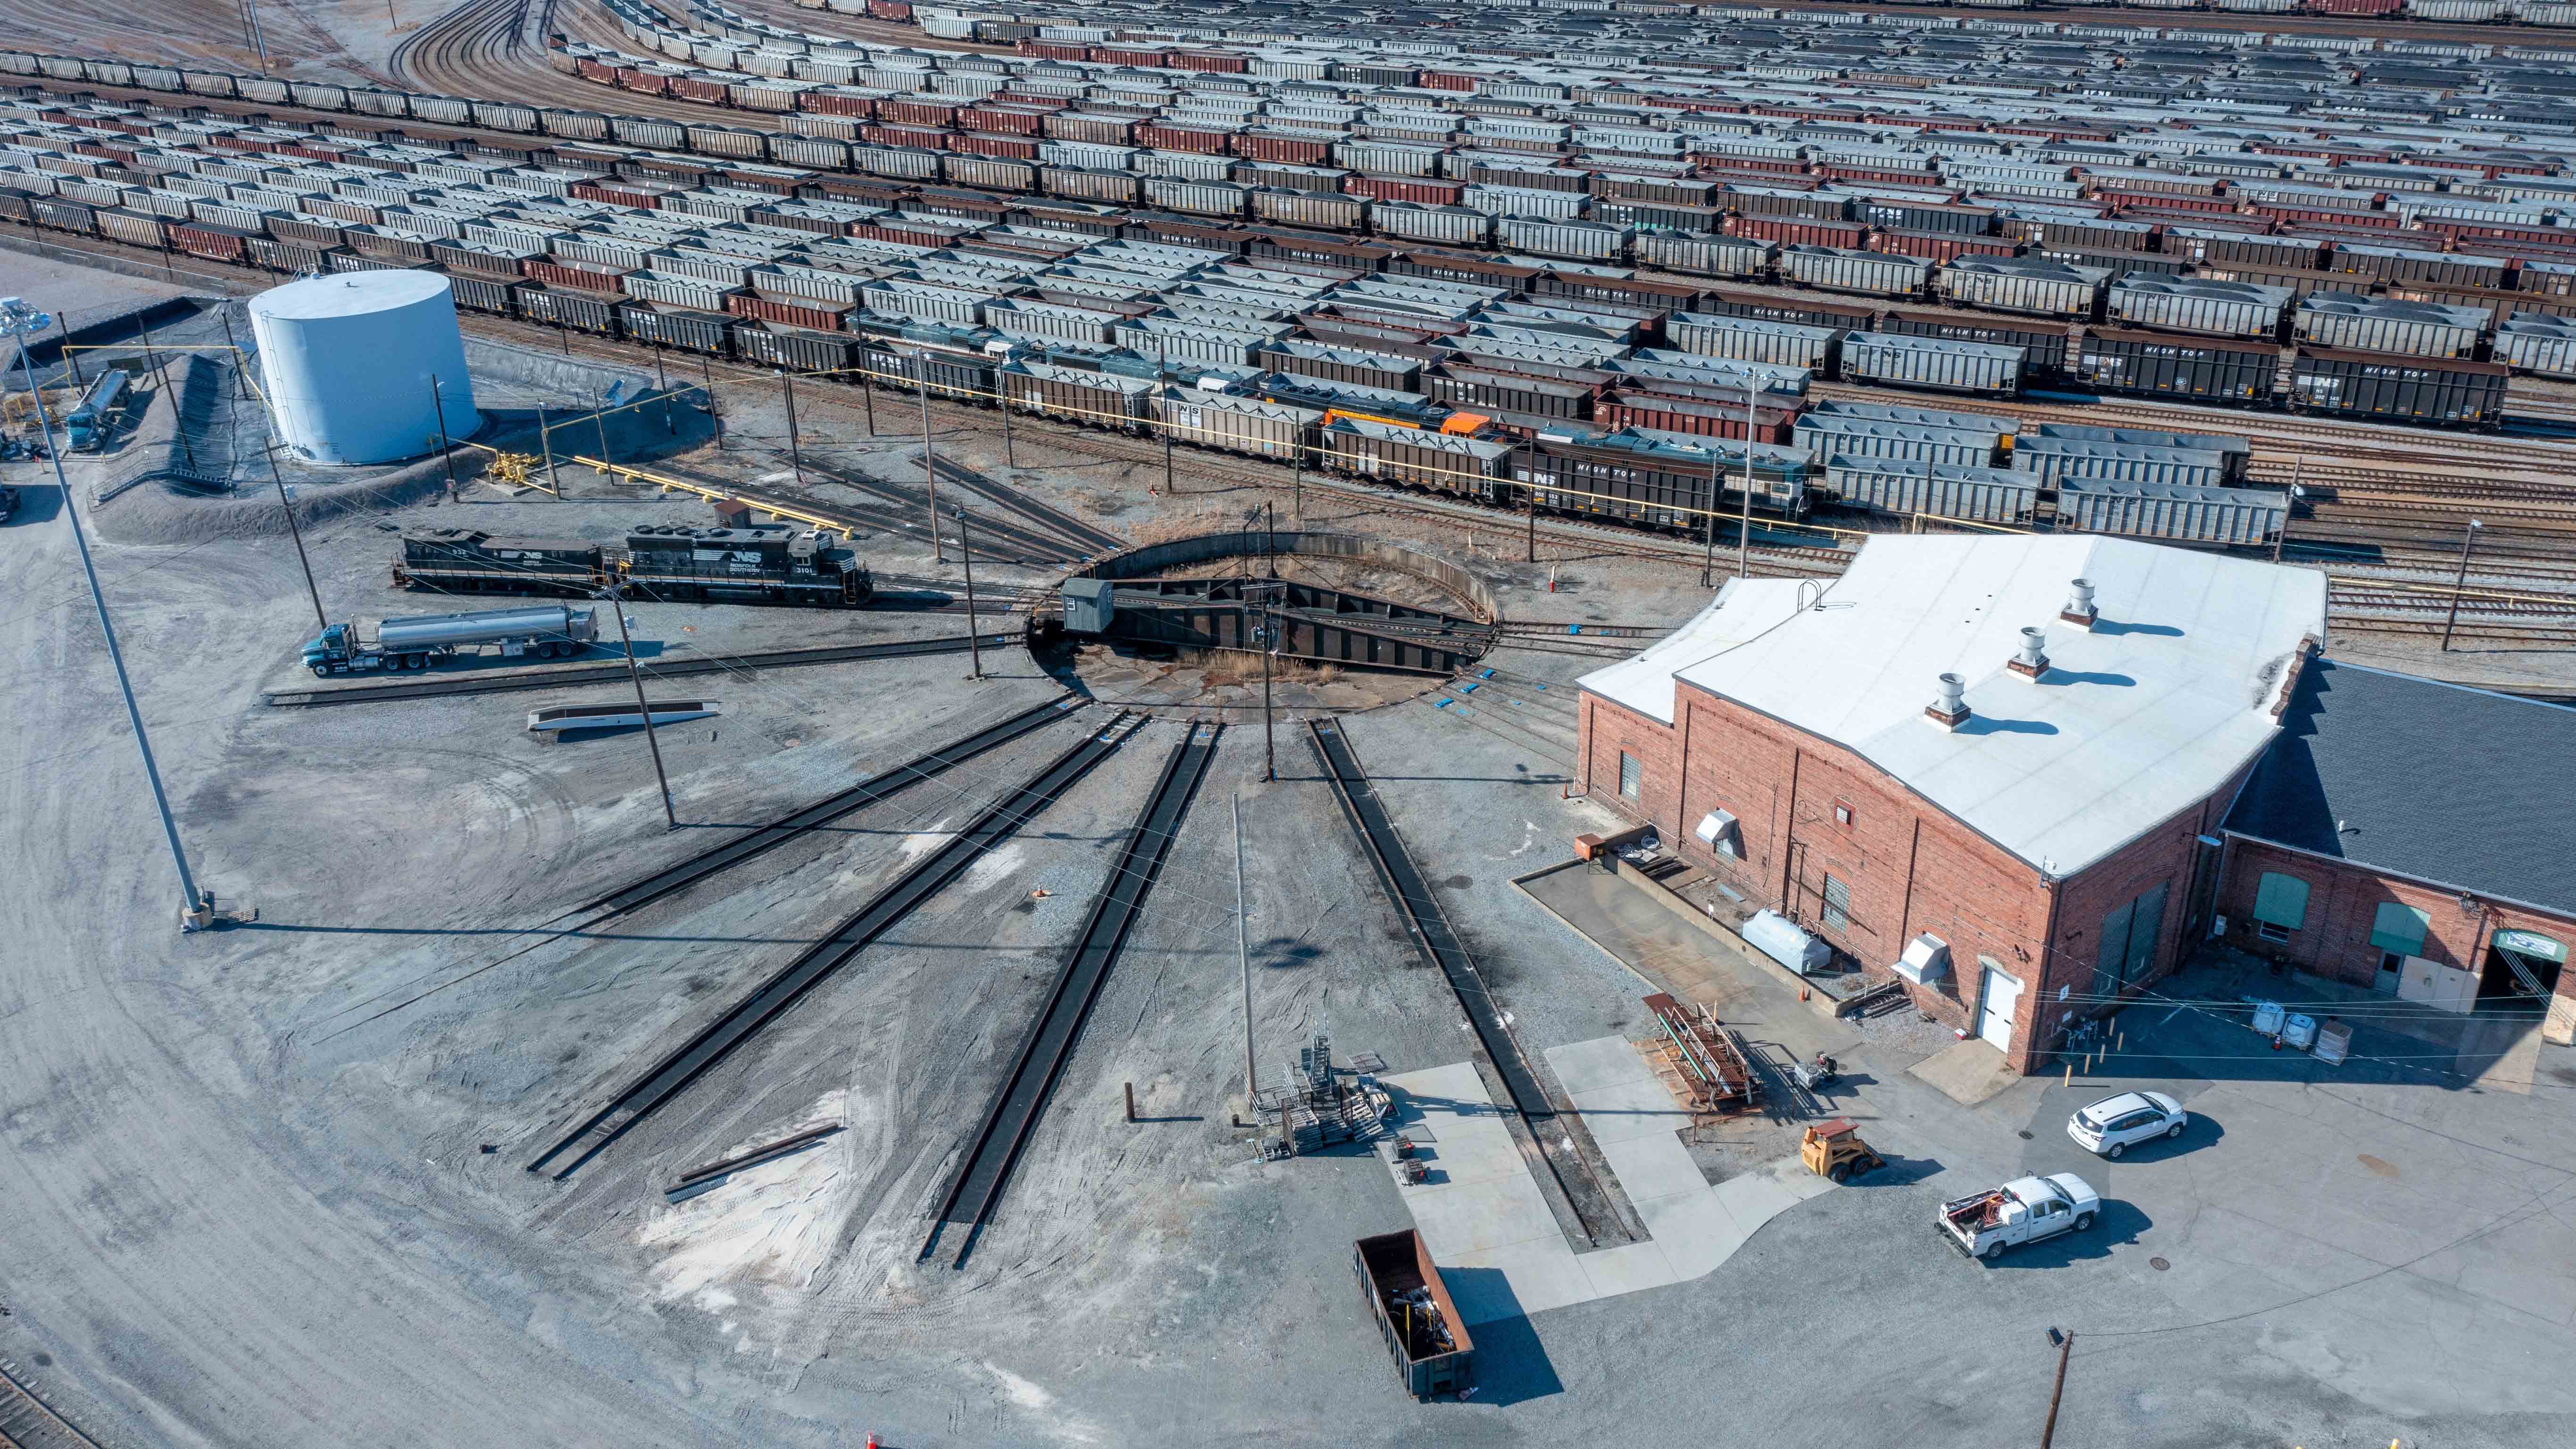 An aerial view of the Norfolk Southern rail yard at Lambert’s Point in March 2022. (Image: Kyle Little via Shutterstock)